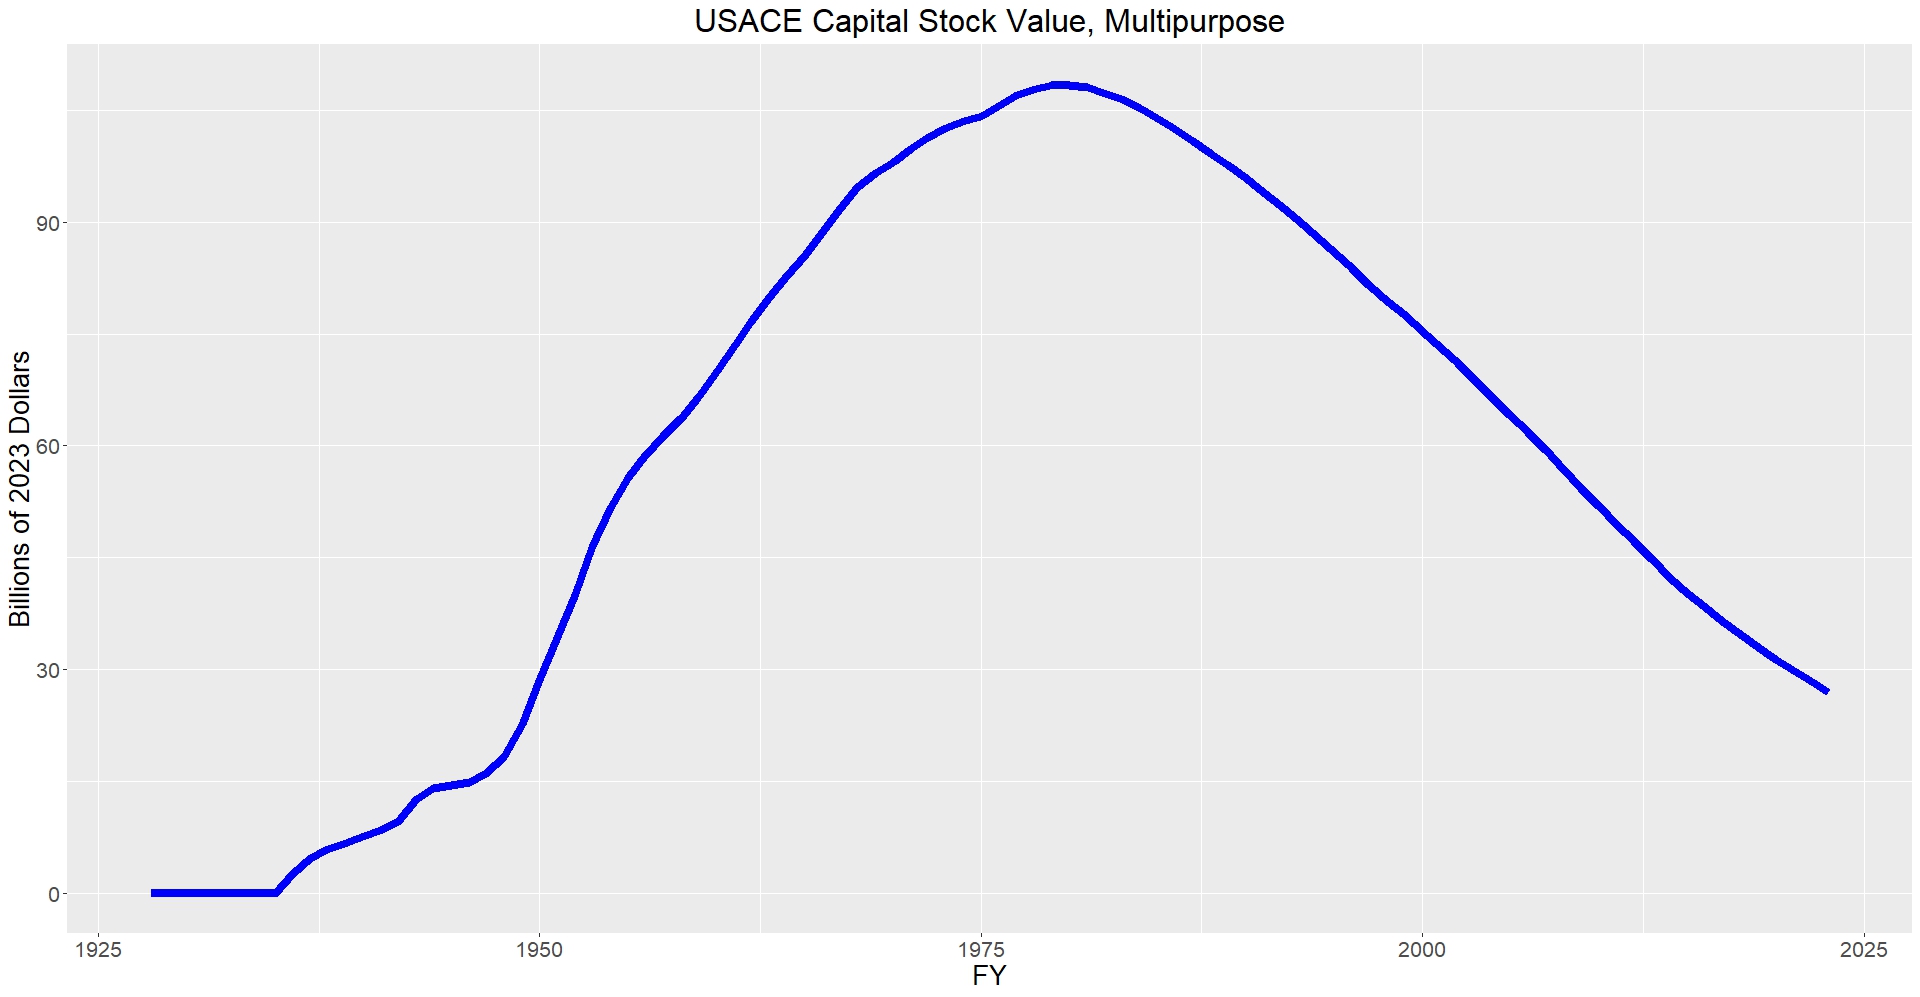 Graphic of USACE Capital Stock Value for Multipurpose Functional Category